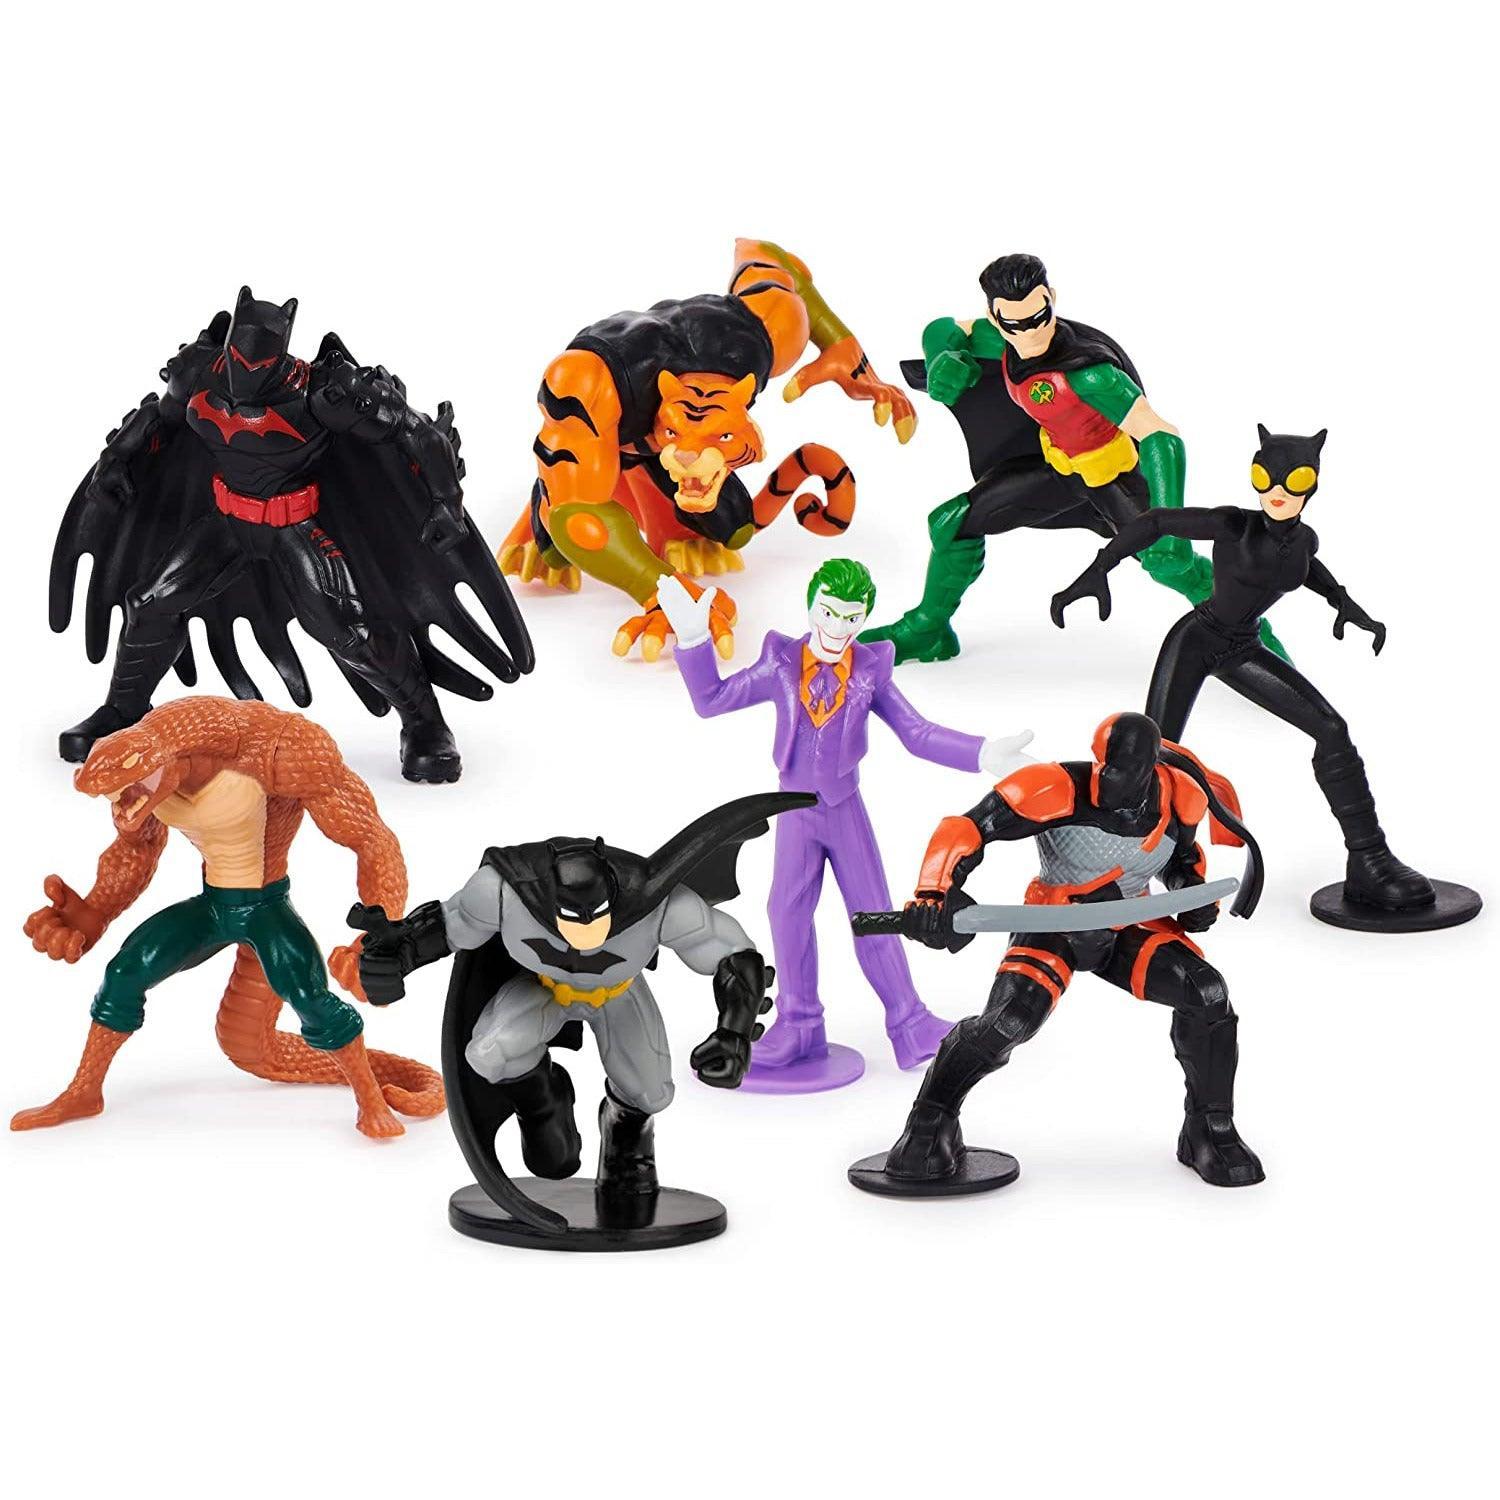 DC Comics Batman 2-inch Scale 8-Pack of Collectible Mini Action Figures - BumbleToys - 5-7 Years, Action Battling, Arabic Triangle Trading, Avengers, Batman, Boys, DC, DC Comics, Pre-Order